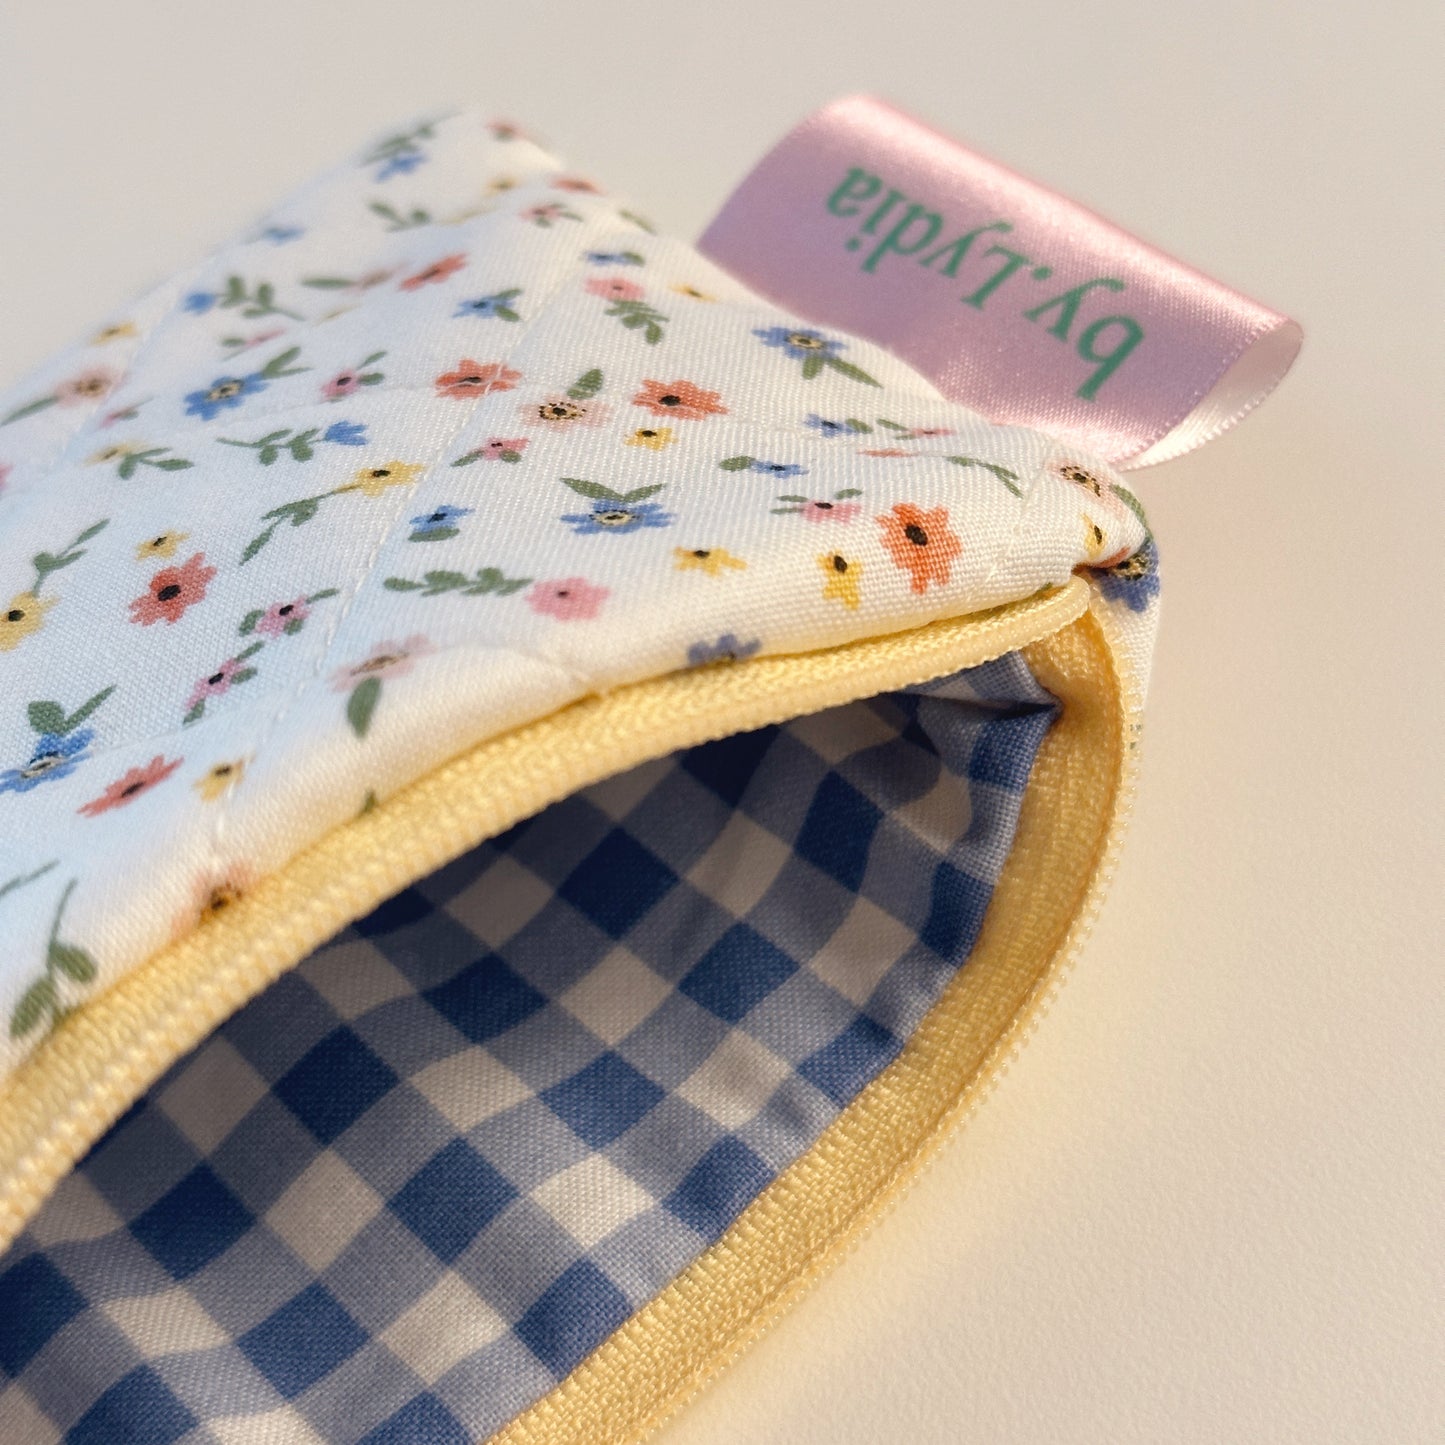 Small Flat Pouch - White Florals